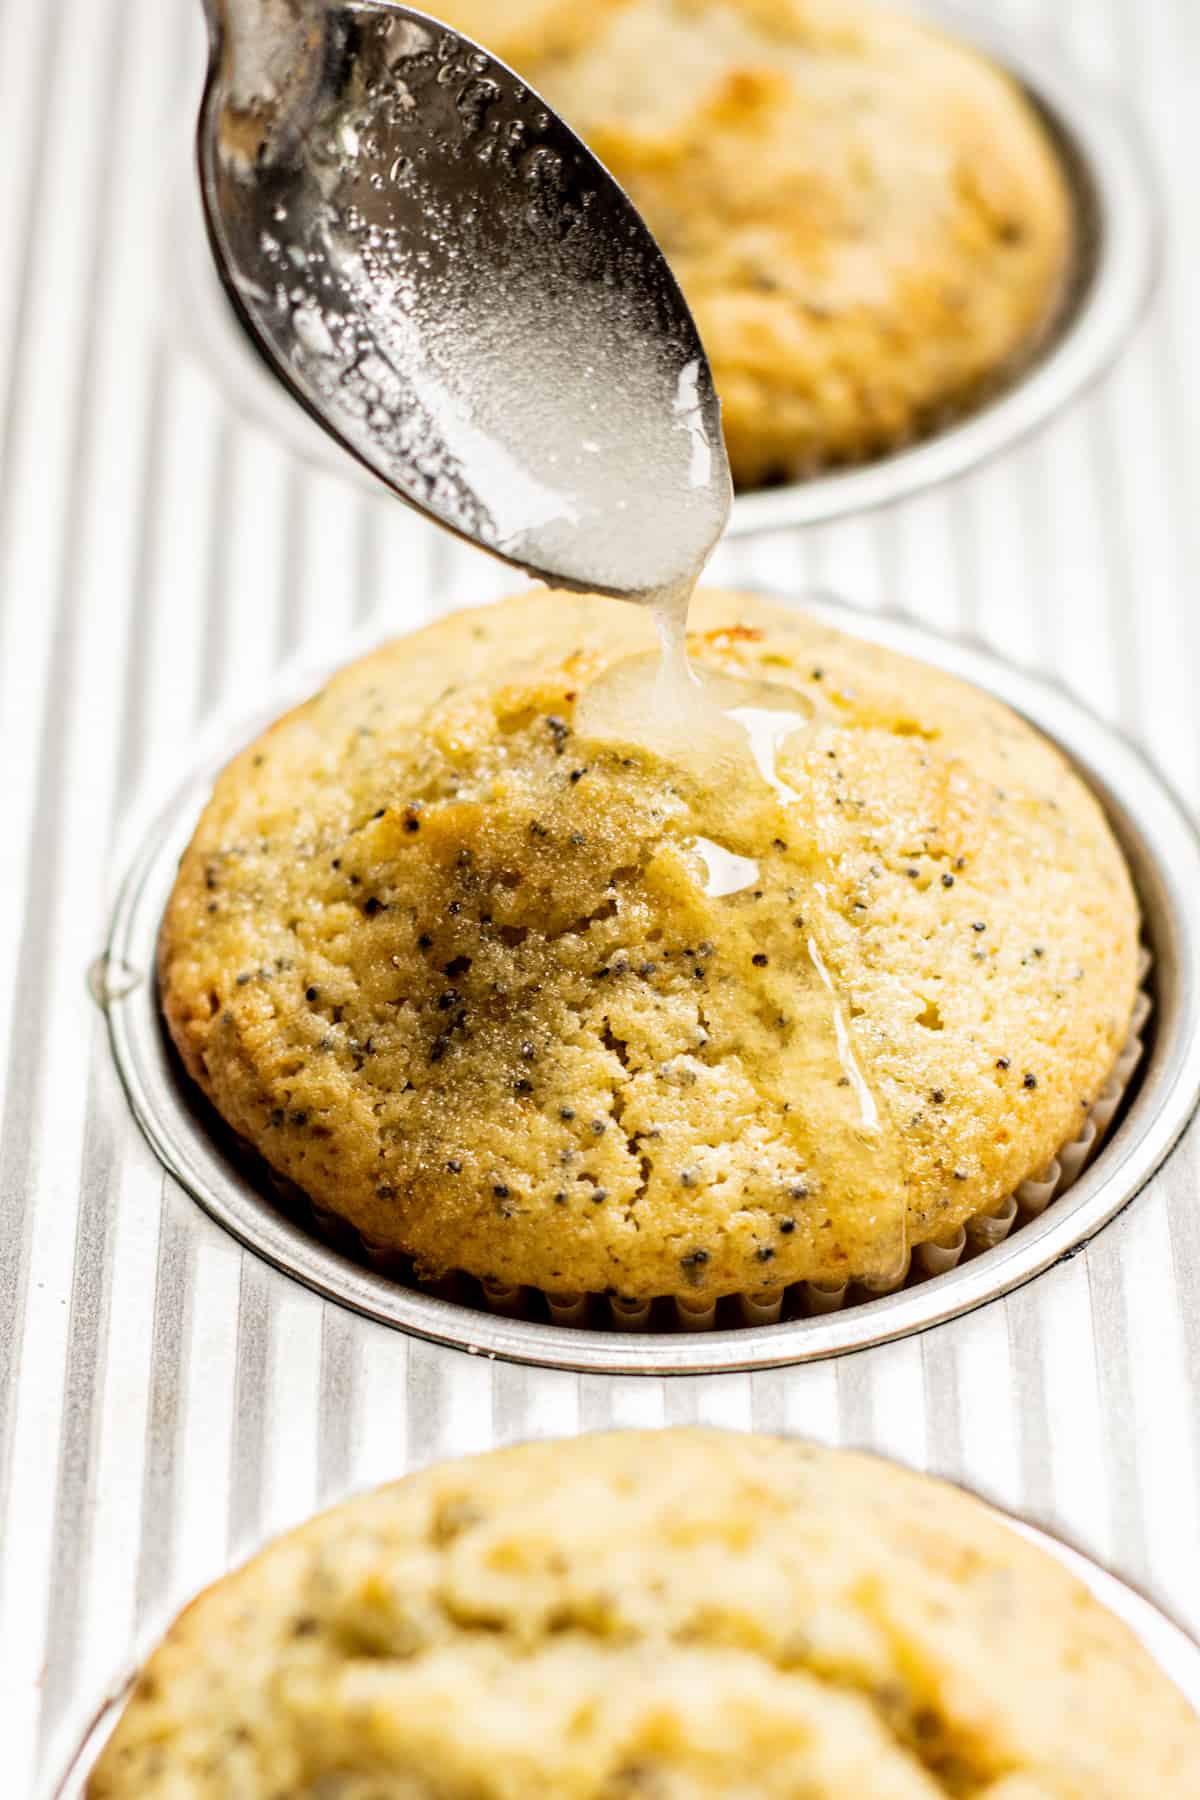 syrup being drizzled onto a muffin.